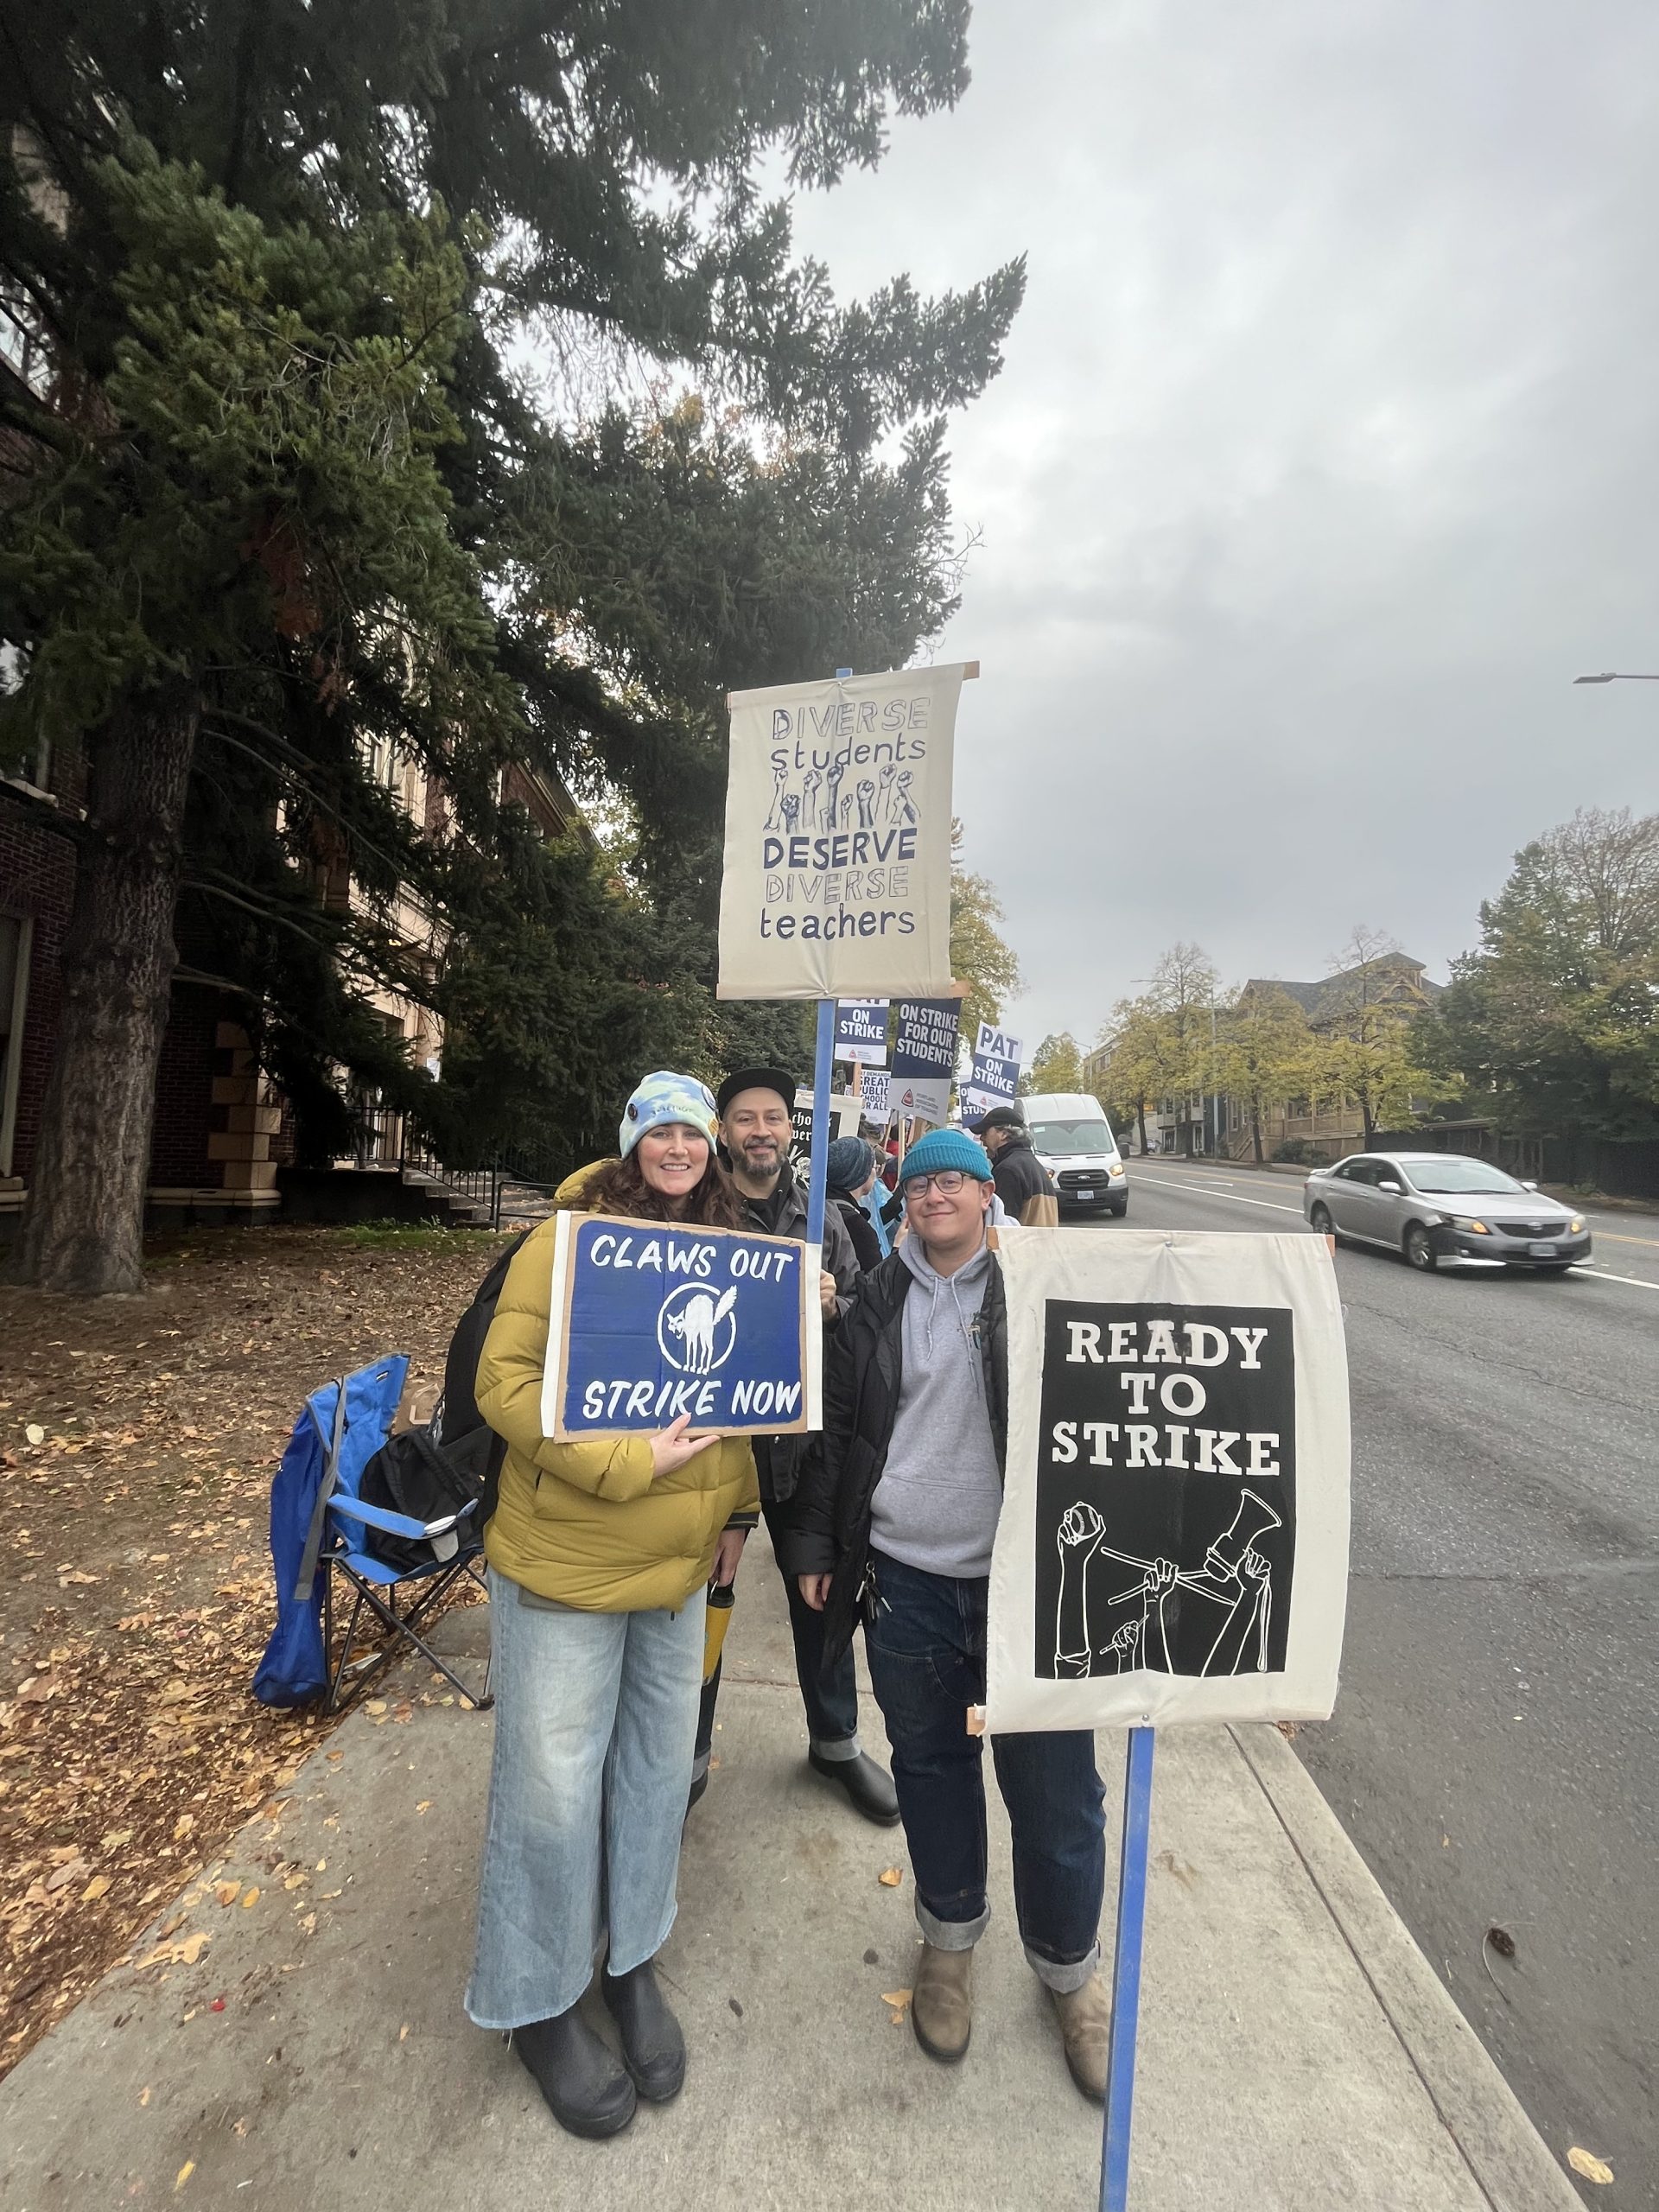 Picketing: Cleveland High School teachers, Ms. Muhs, Mr. Ereckson, and Mr. Shalman holding signs on the side of Powell Boulevard next to Cleveland.